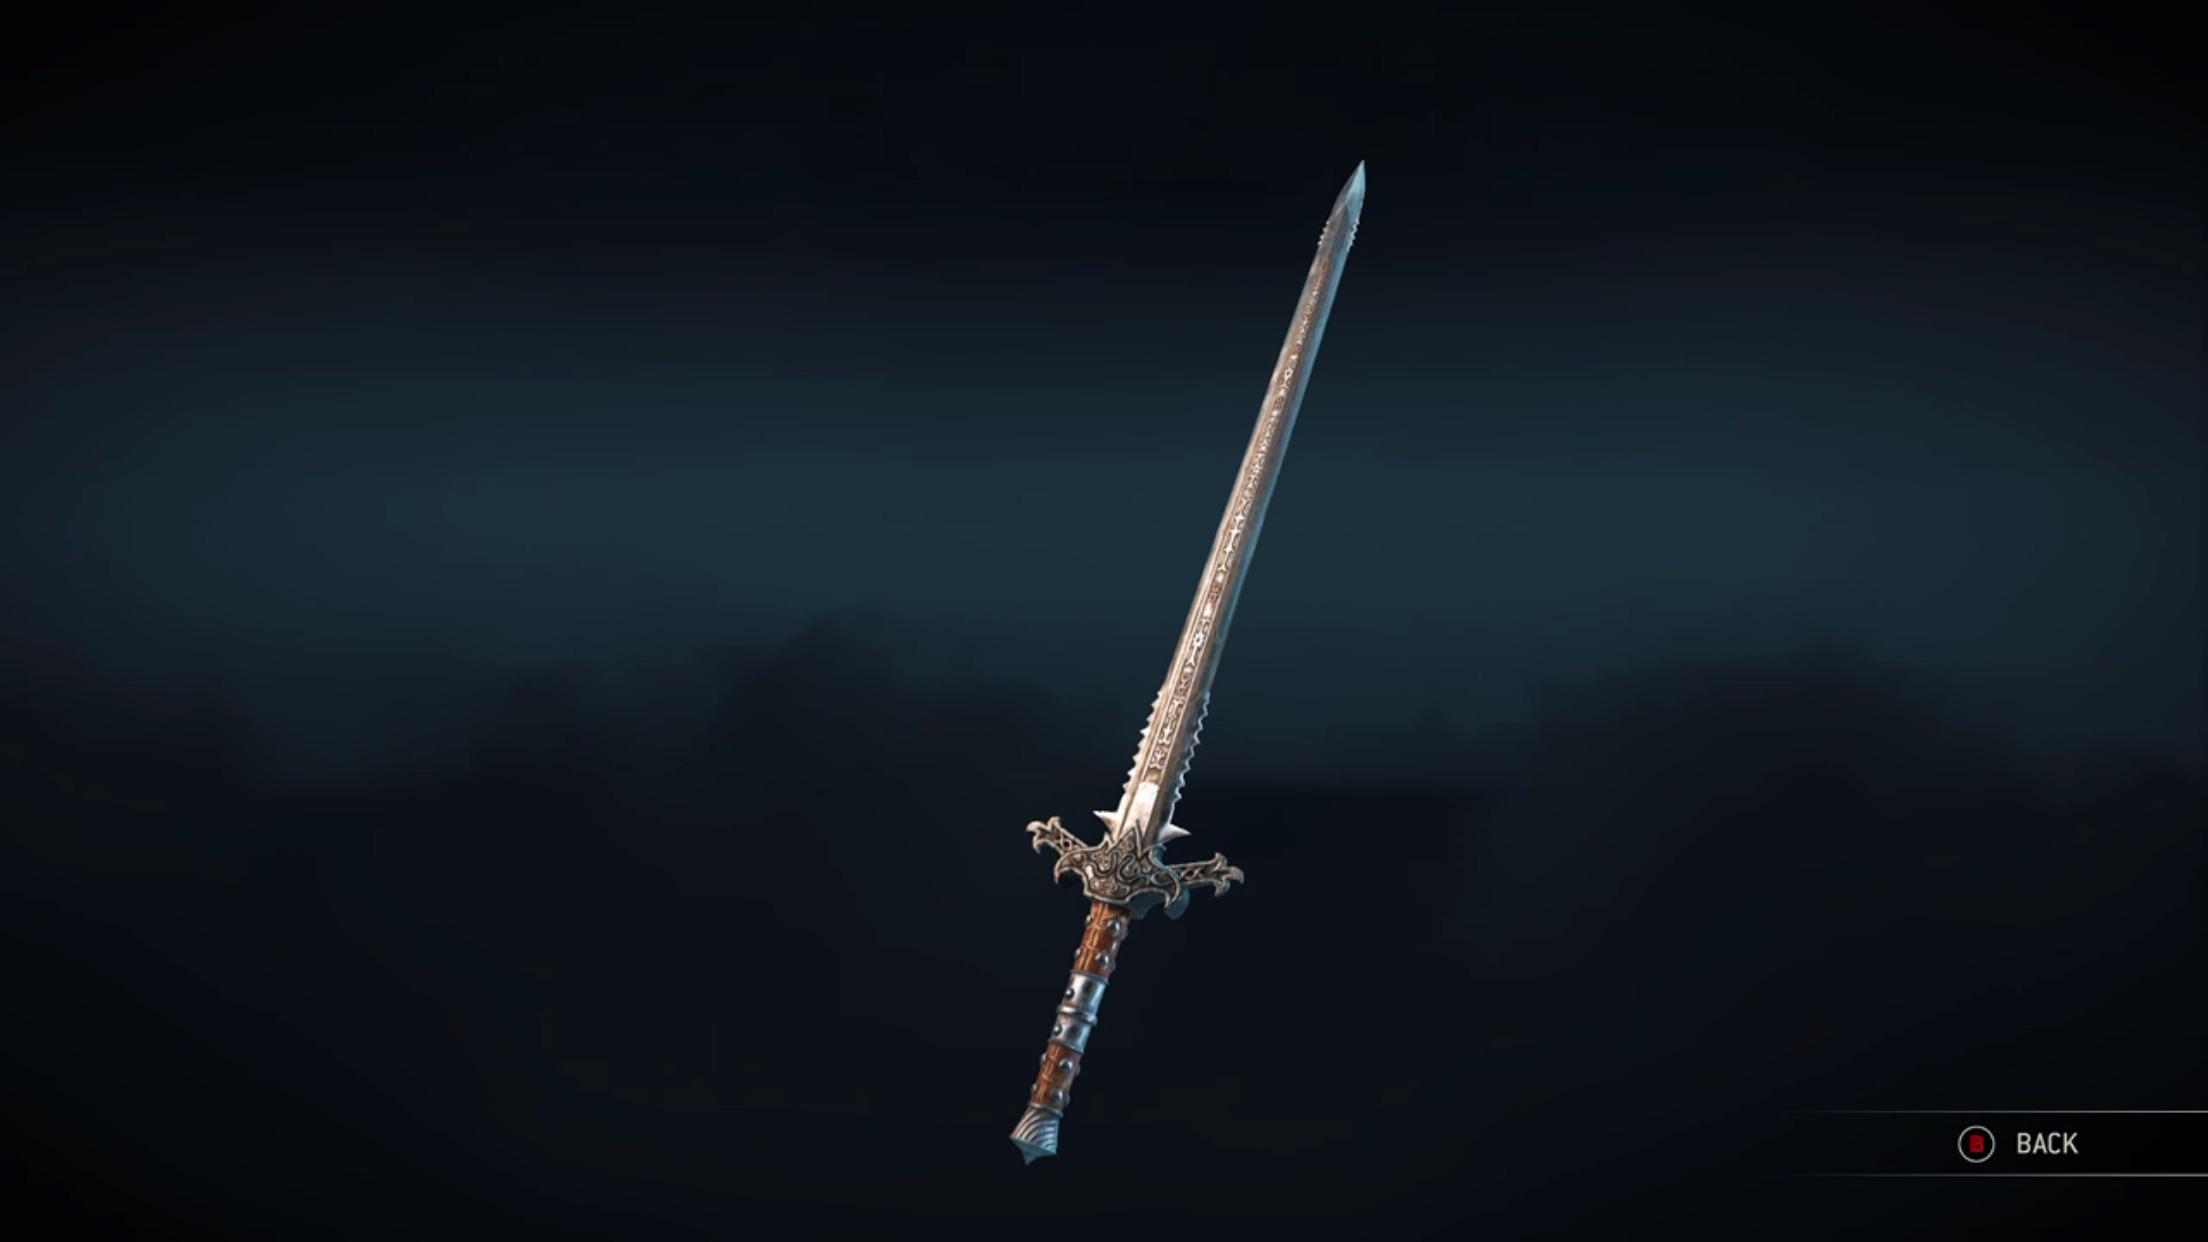 And this is what her sword looks like for Warden.